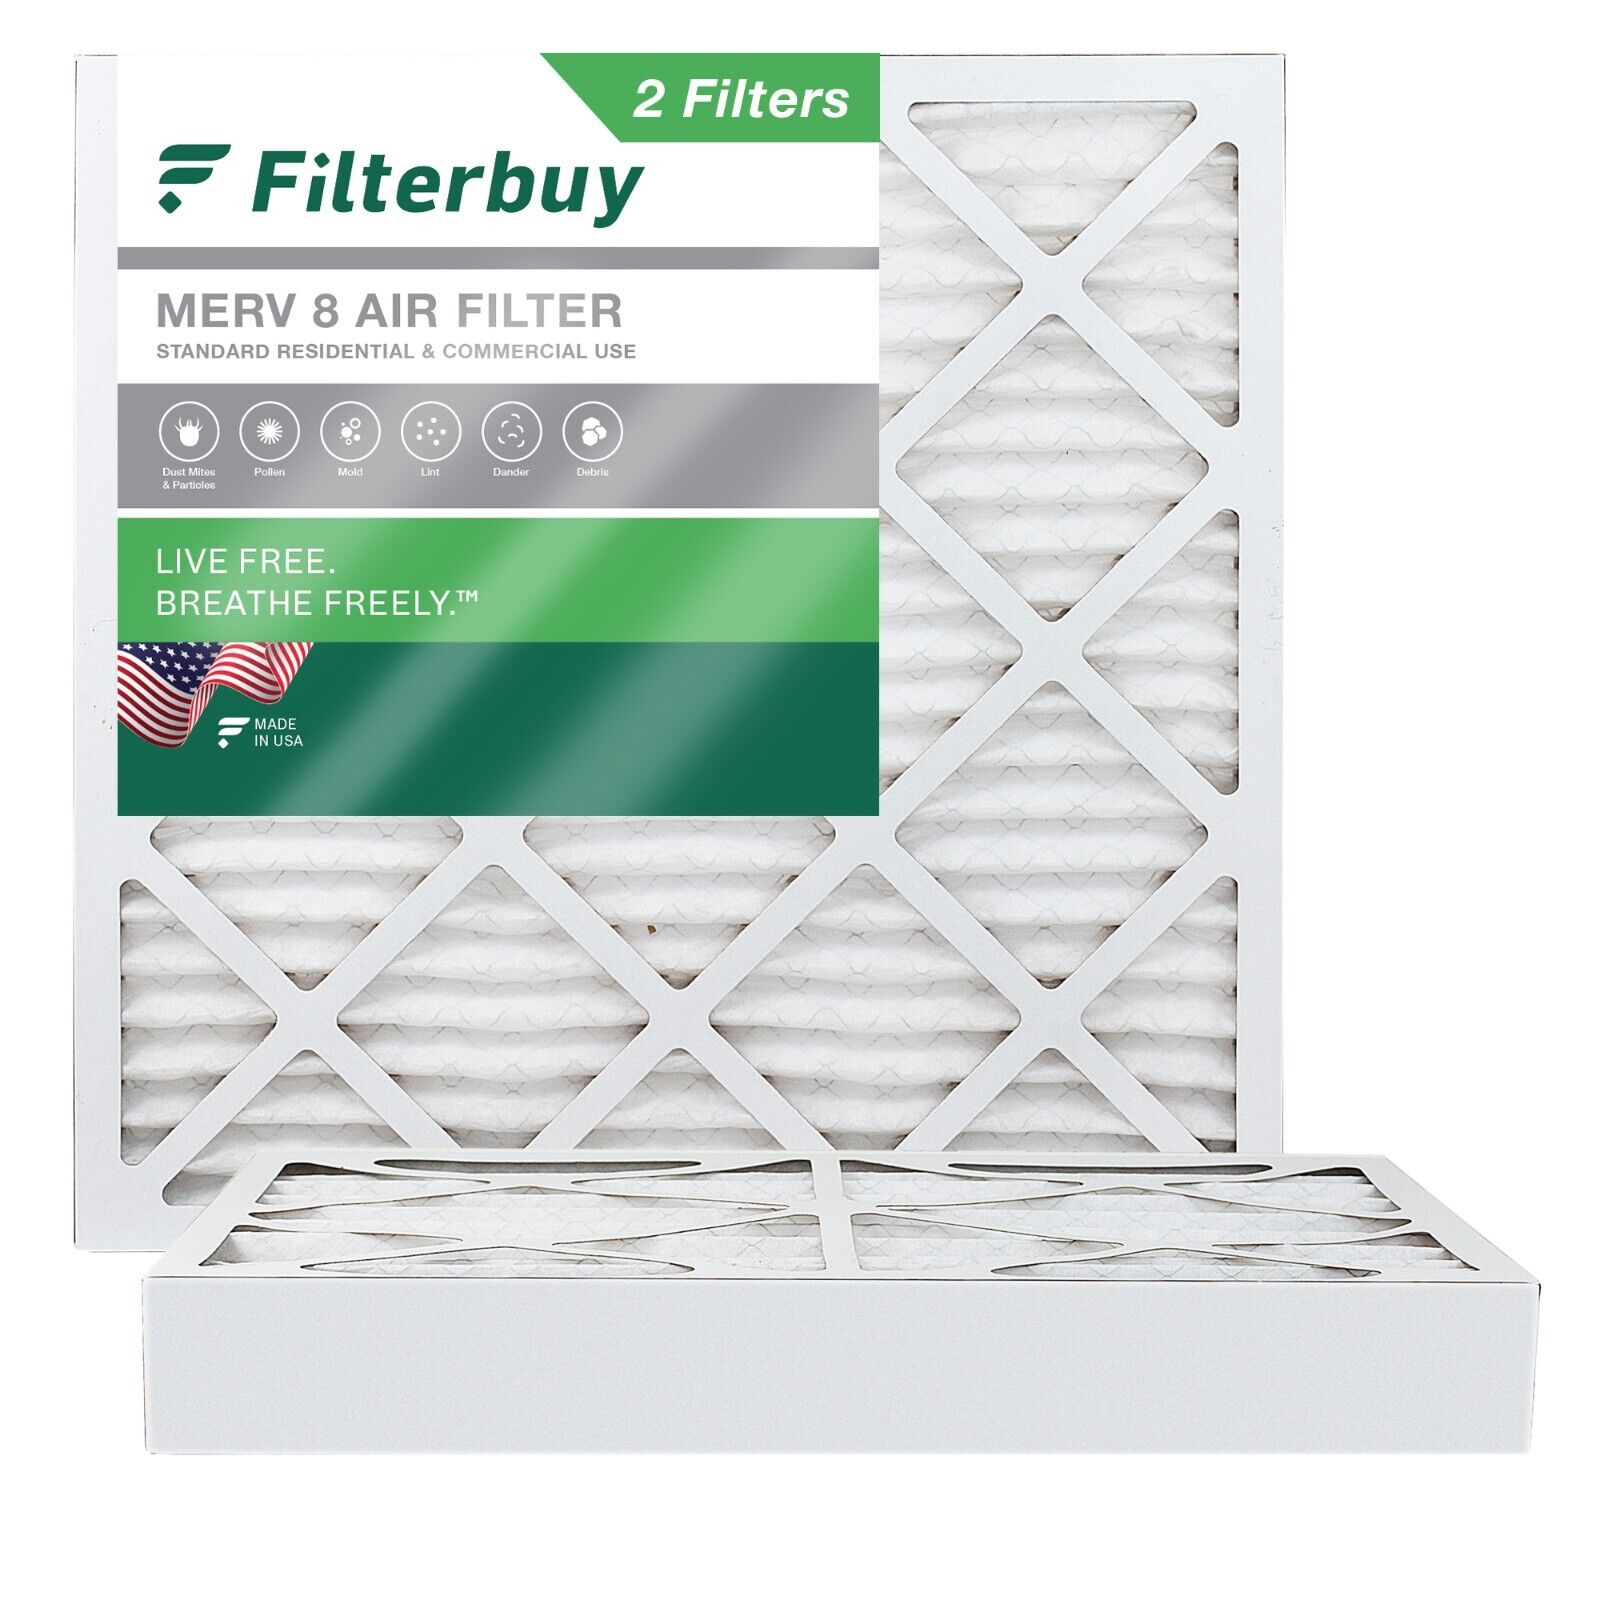 Filterbuy 20x20x4 Pleated Air Filters, Replacement for HVAC AC Furnace (MERV 8)